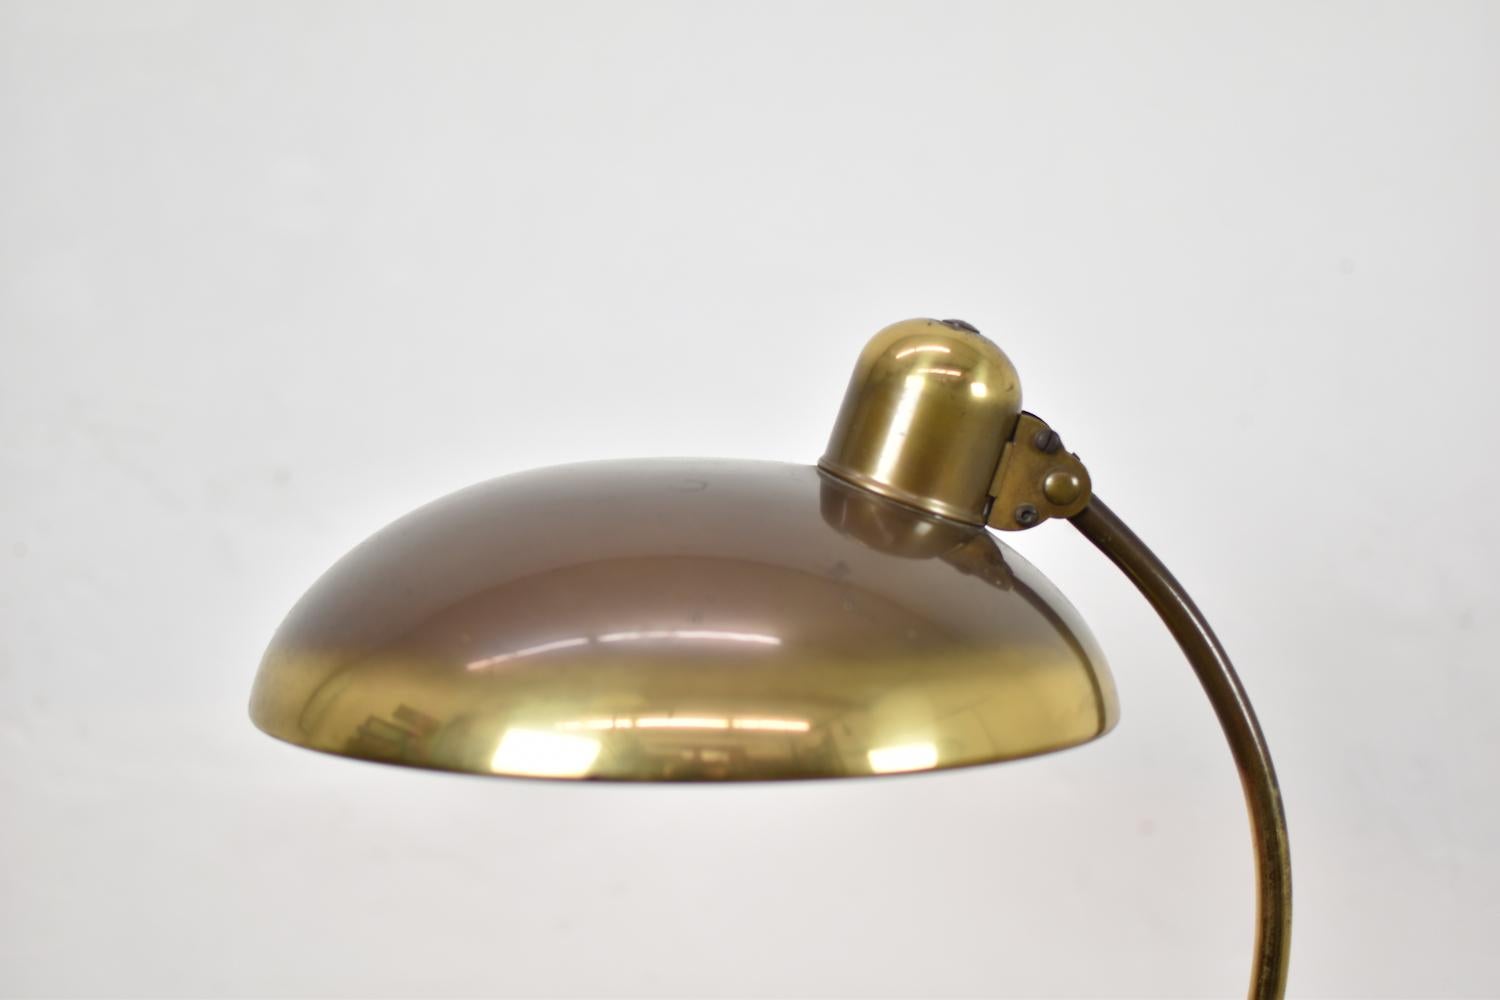 Lovely ‘President’ desk lamp by Christian Dell for Kaiser Idell, Germany 1930s. This table lamp is made out of brass and both arms and shade are fully adjustable. Very nice original condition with visible signs of age and wear. Labeled.